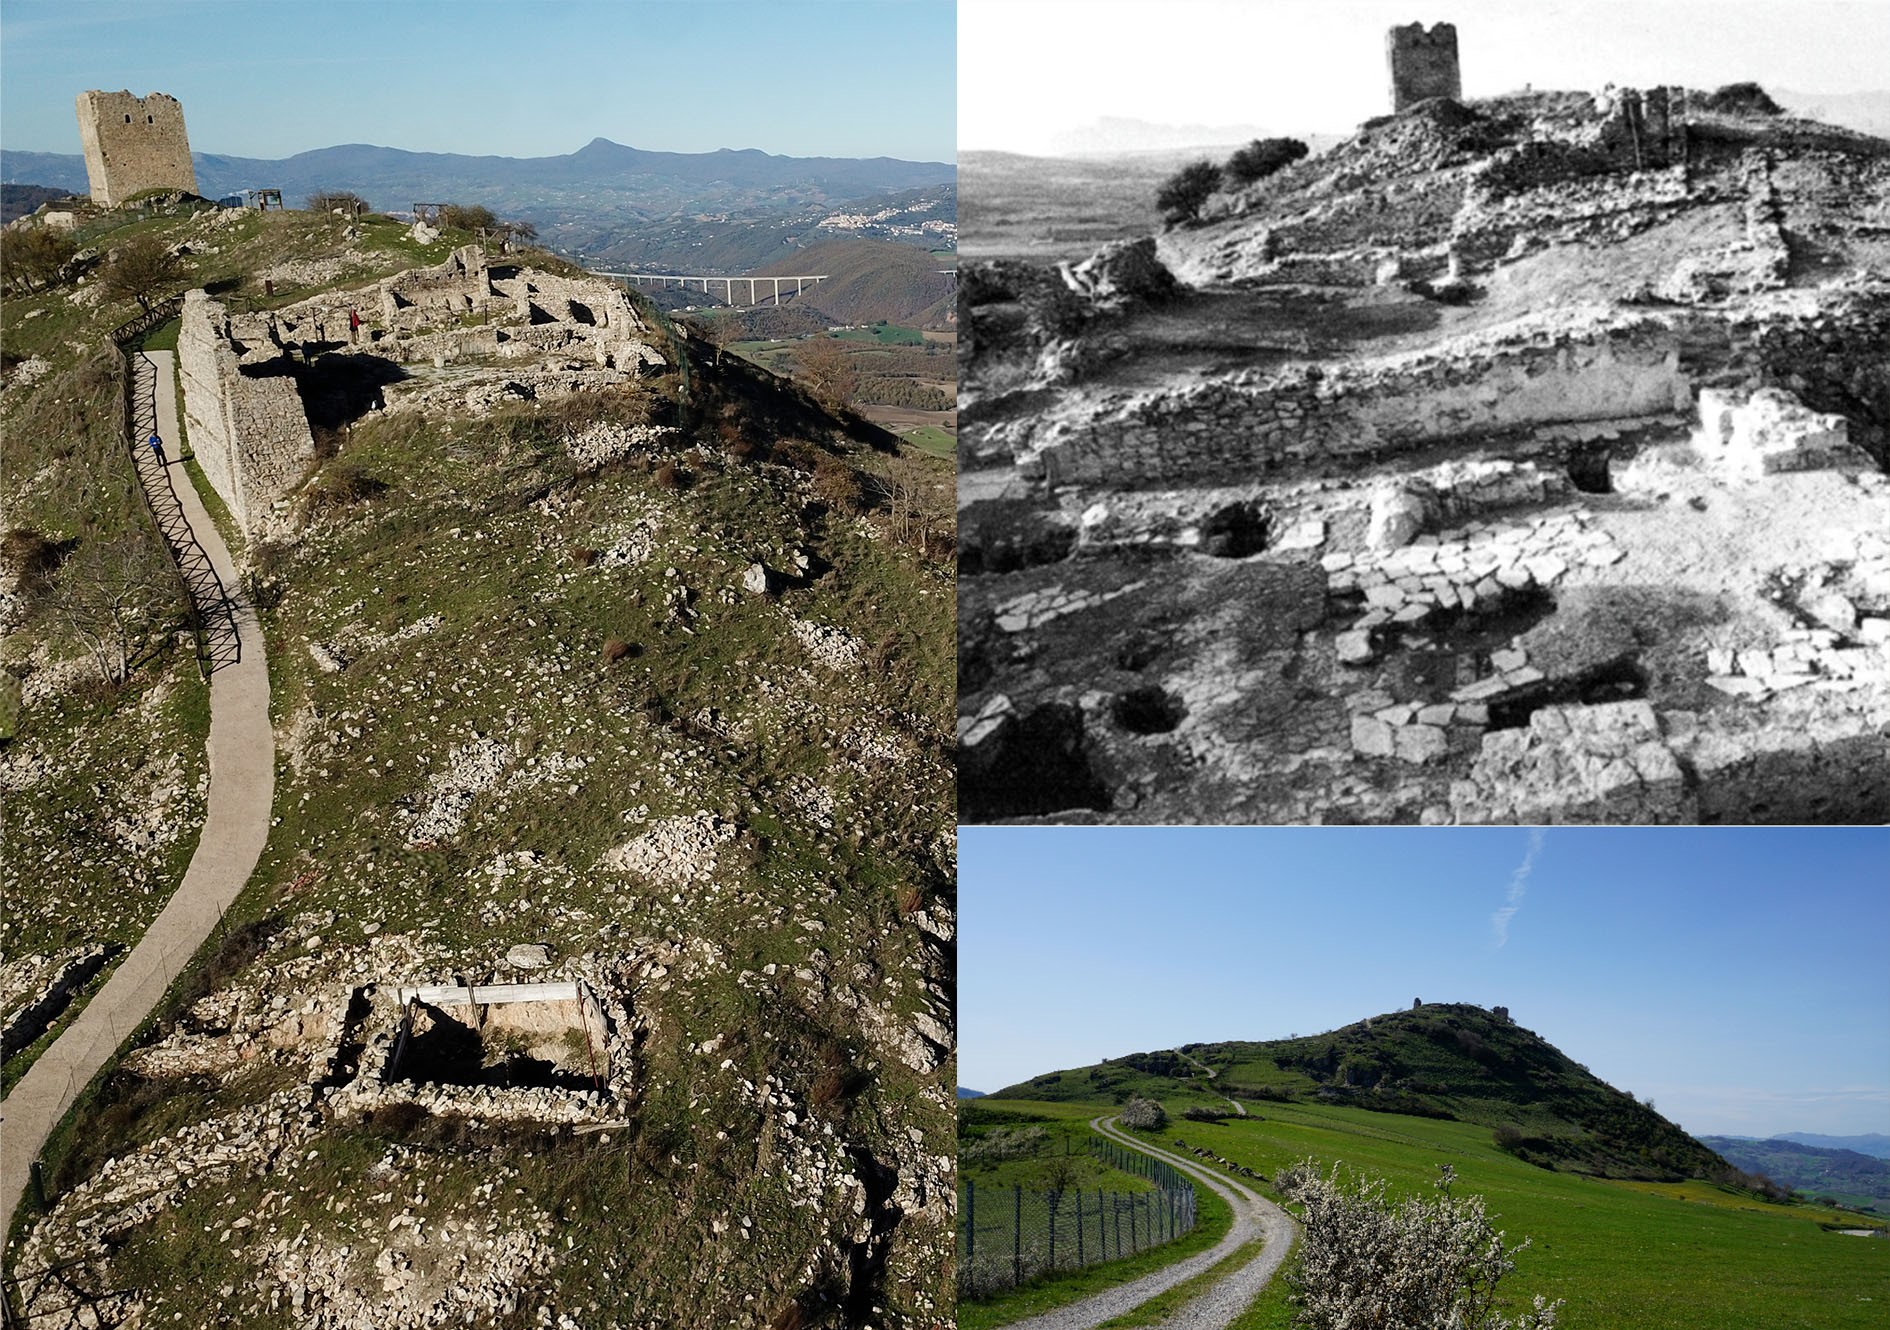 A digital ecosystem for the knowledge, conservation and valorization of the medieval archaeological site of Satrianum (Tito, PZ). FOSS instruments